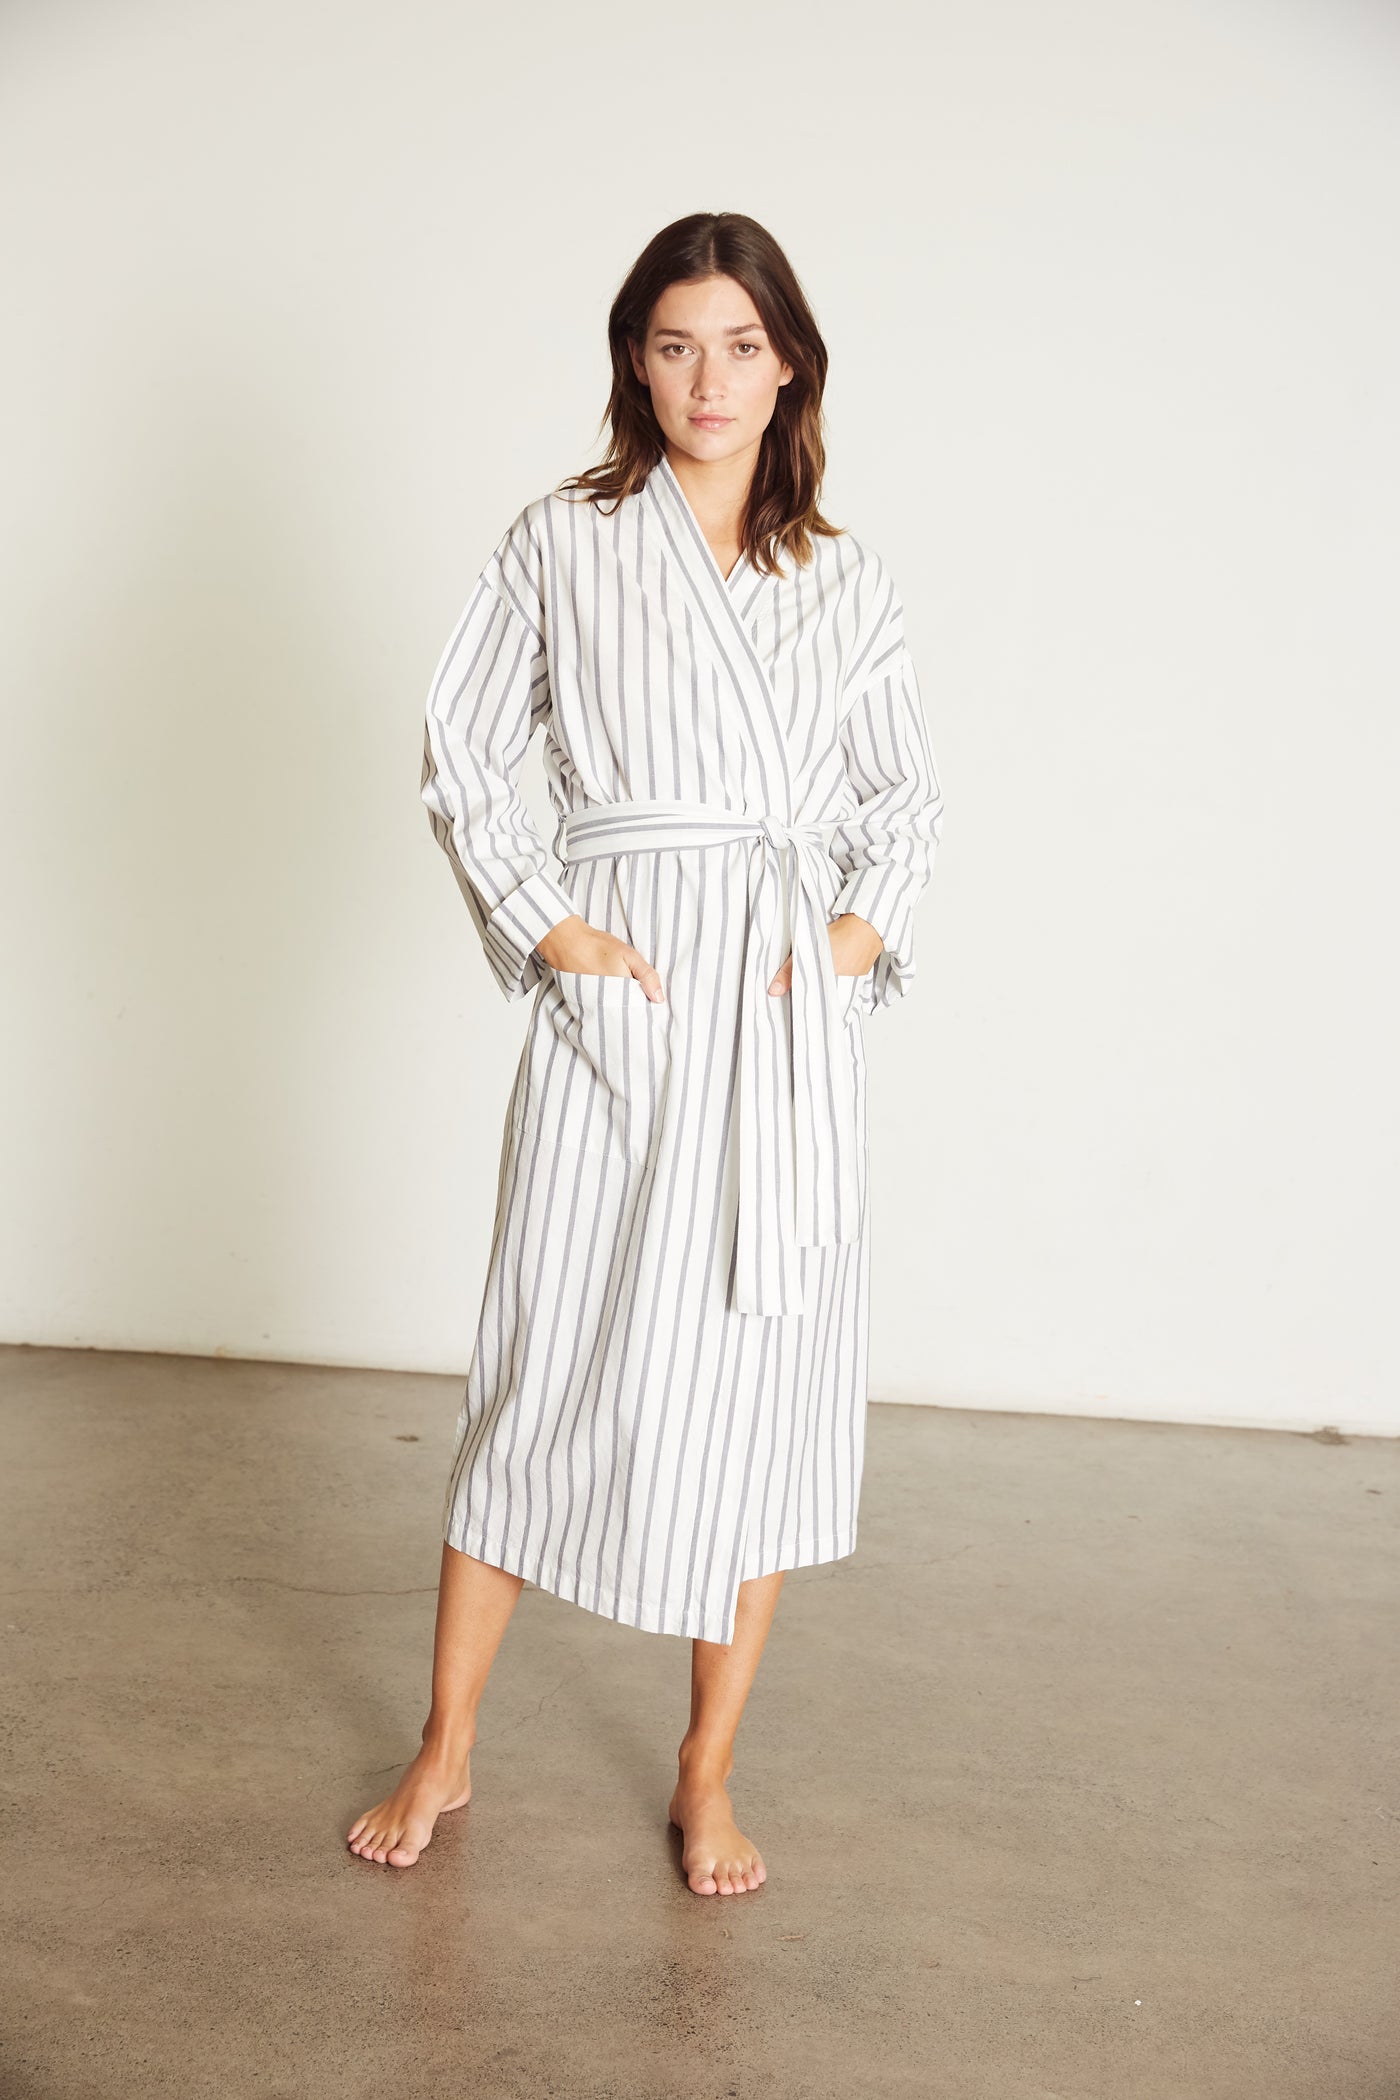 Women’s Robe.  Made from 100% organic cotton.  White, with a navy stripe.  This robe has a relaxed-fit with a dropped shoulder, front patch pockets and a tie belt. Finished with French seams.